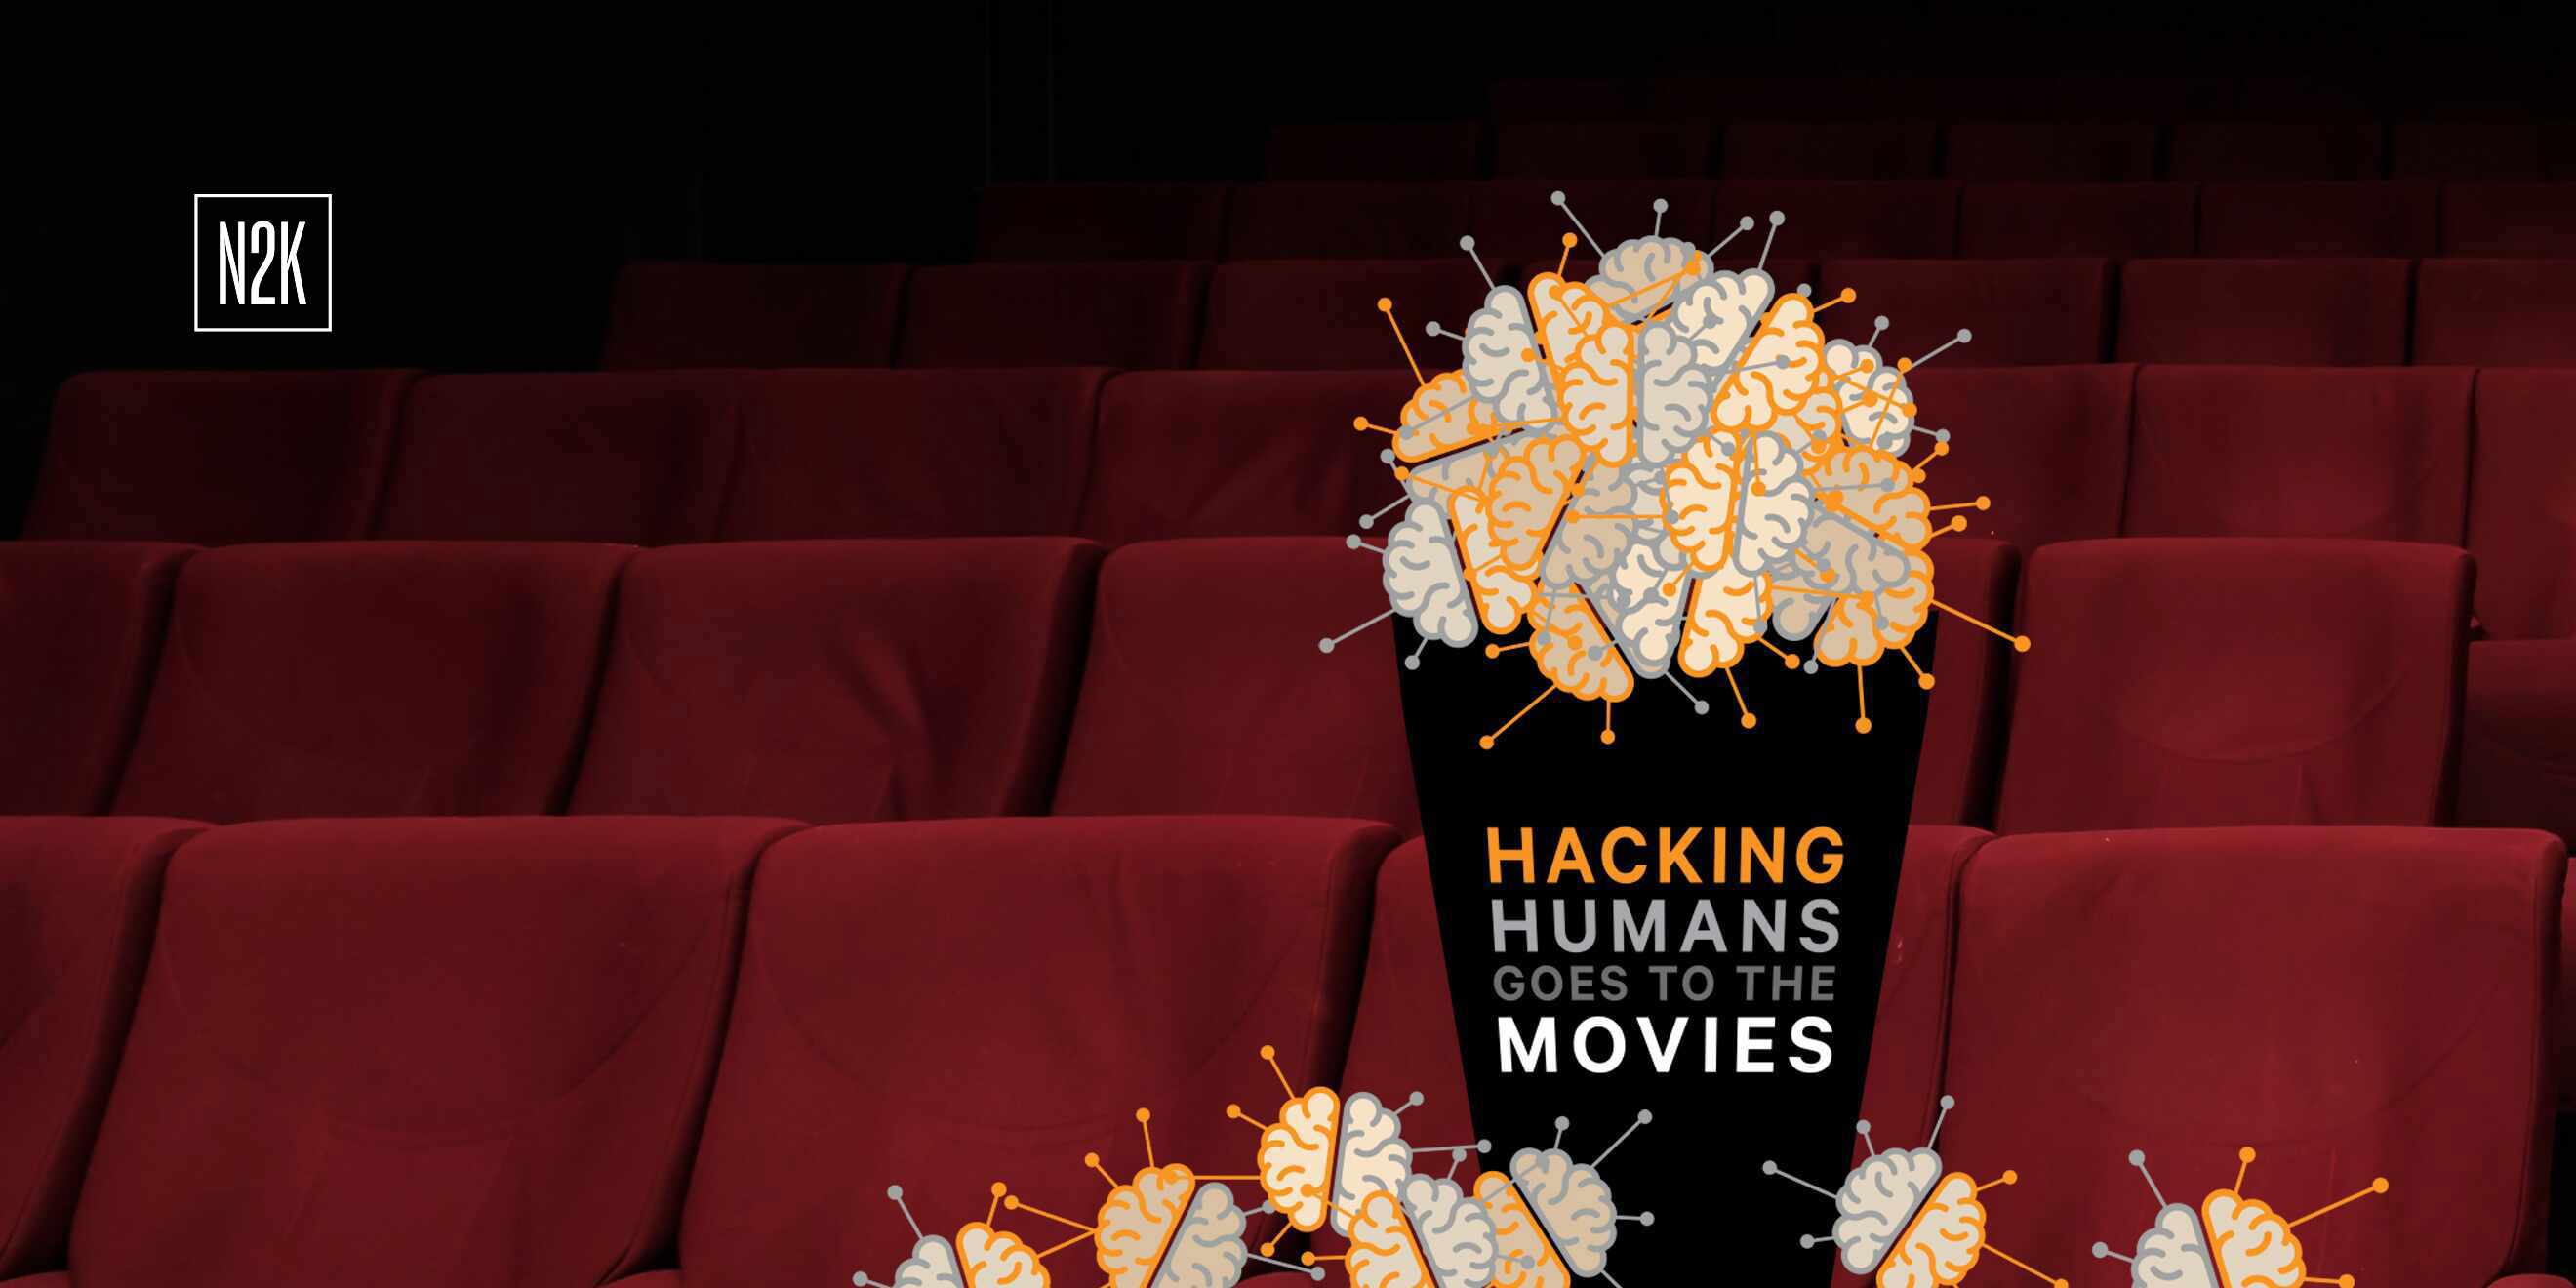 Hacking Humans Goes to the Movies 12.24.21